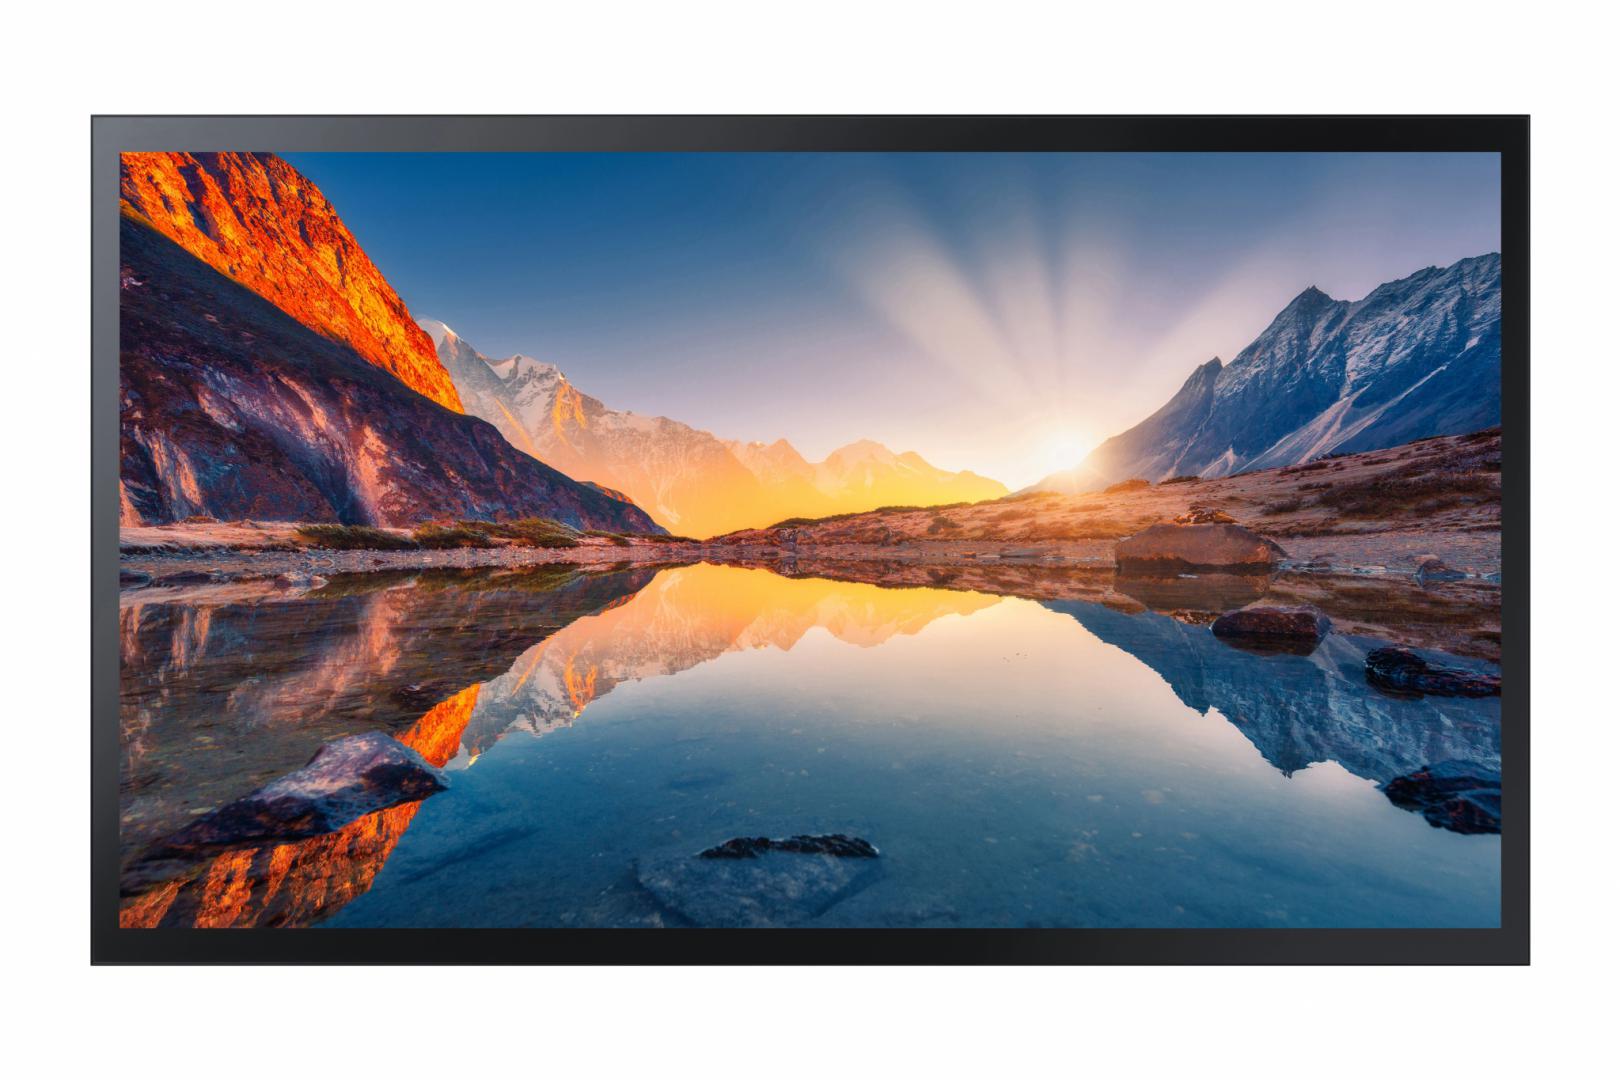 Ecran profesional touch Capacitiv Samsung QM32R-T, 32", FHD, 16/7, 300nit, Edge LED BLU, 8ms, contrast static 5000:1, mătuire 2%, Tizen 4.0, MagicINFO 6, CPU A72*4, RAM 2.5GB, stocare 8GB. Temperature sensor, Video Wall Daisy Chain, auto source switching & recovery, Button Lock, Hot key option